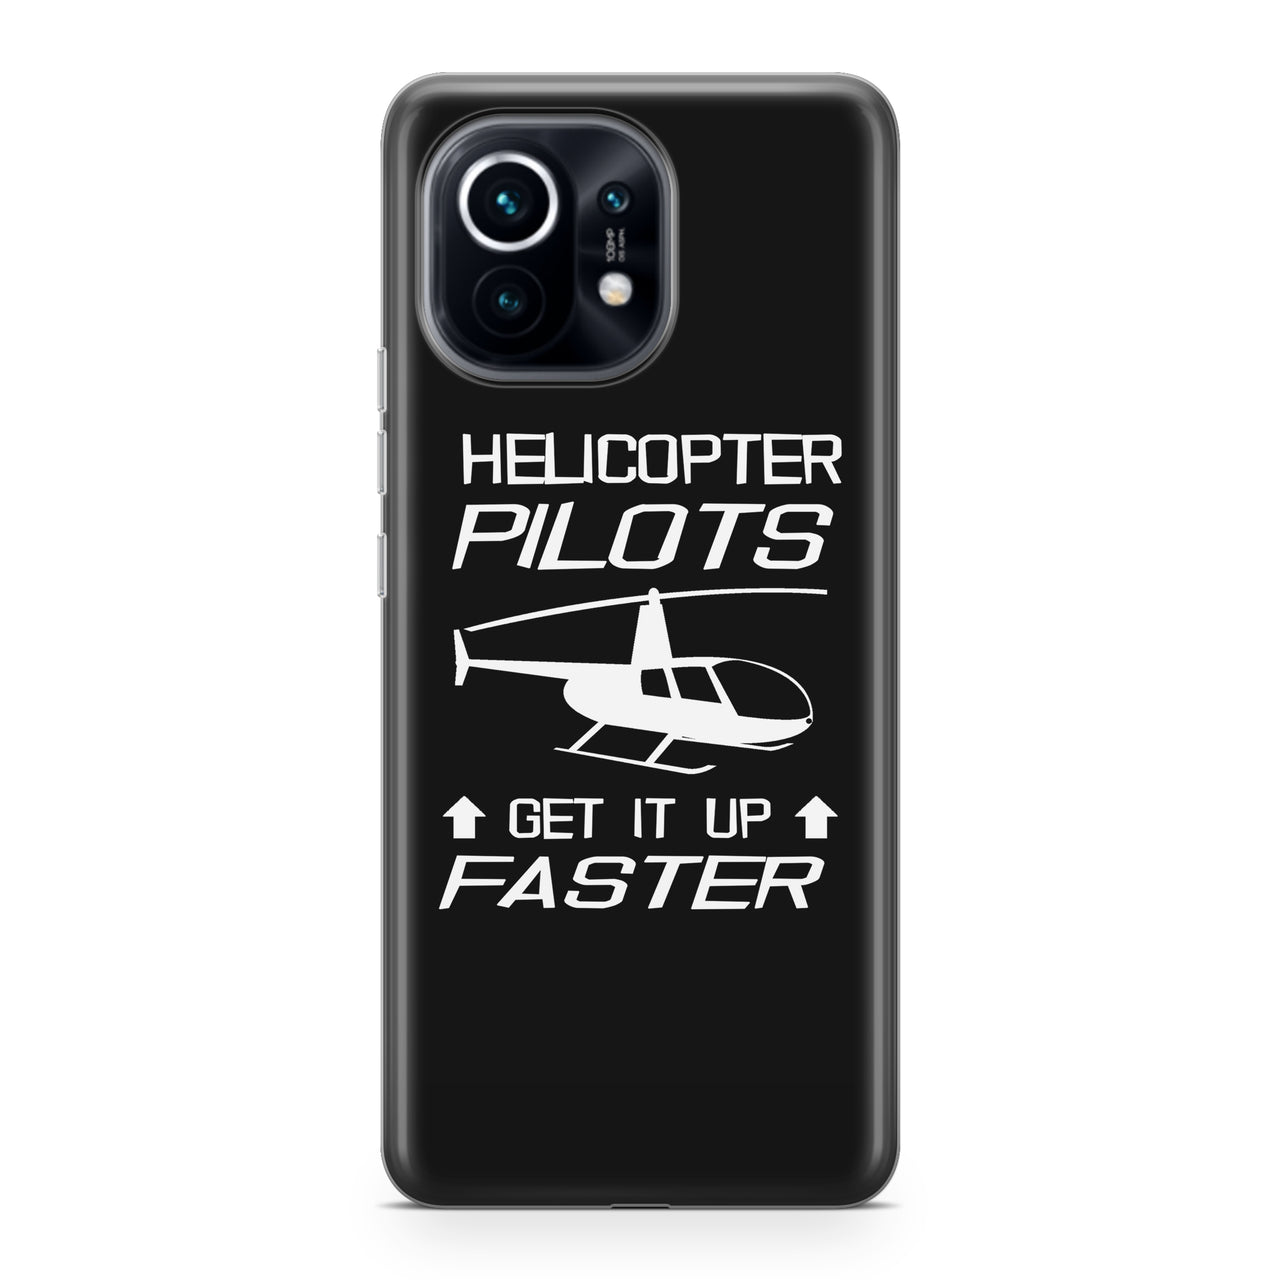 Helicopter Pilots Get It Up Faster Designed Xiaomi Cases